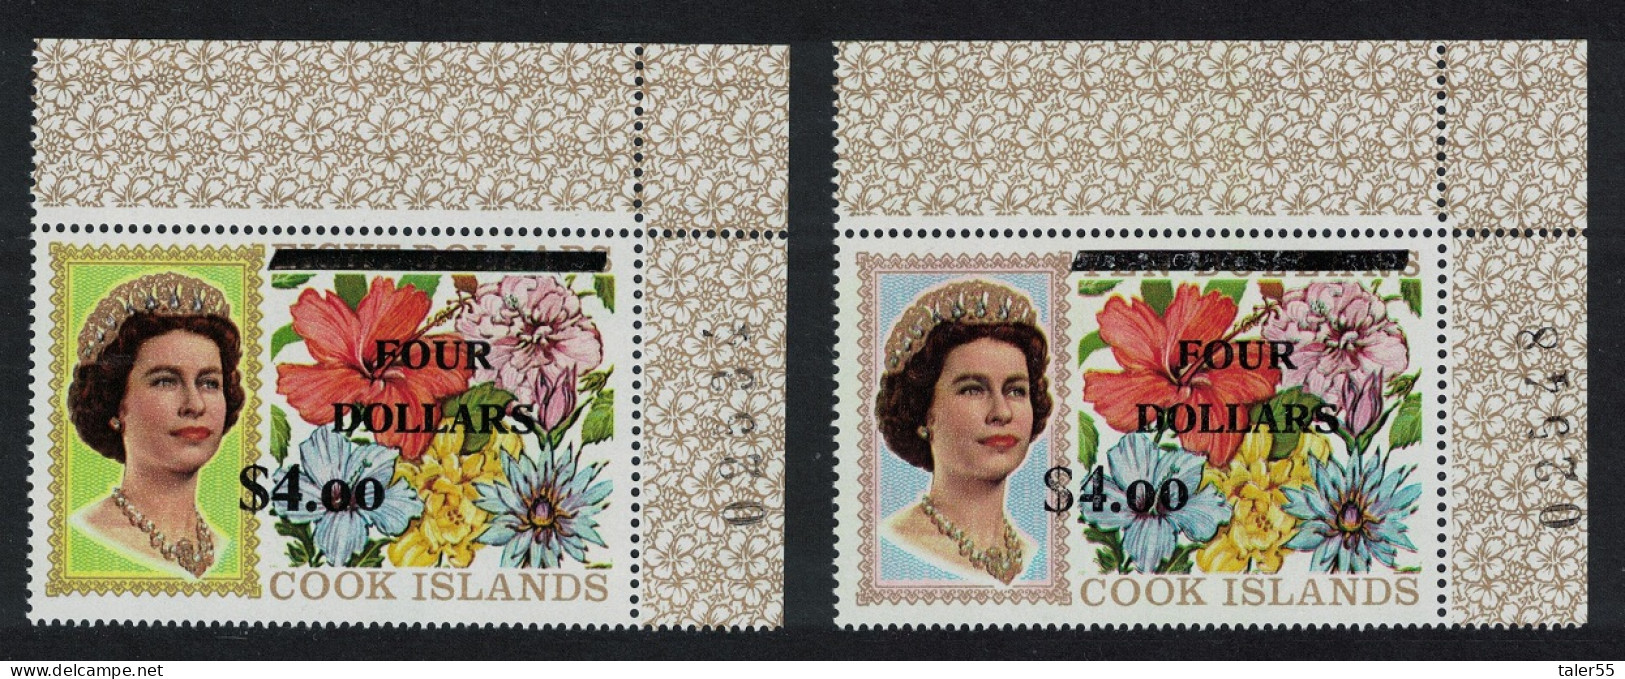 Cook Is. Flowers Surch FOUR DOLLARS $4.00 Without Security RAR 1970 MNH SG#335-336 MI#254x-255x - Islas Cook